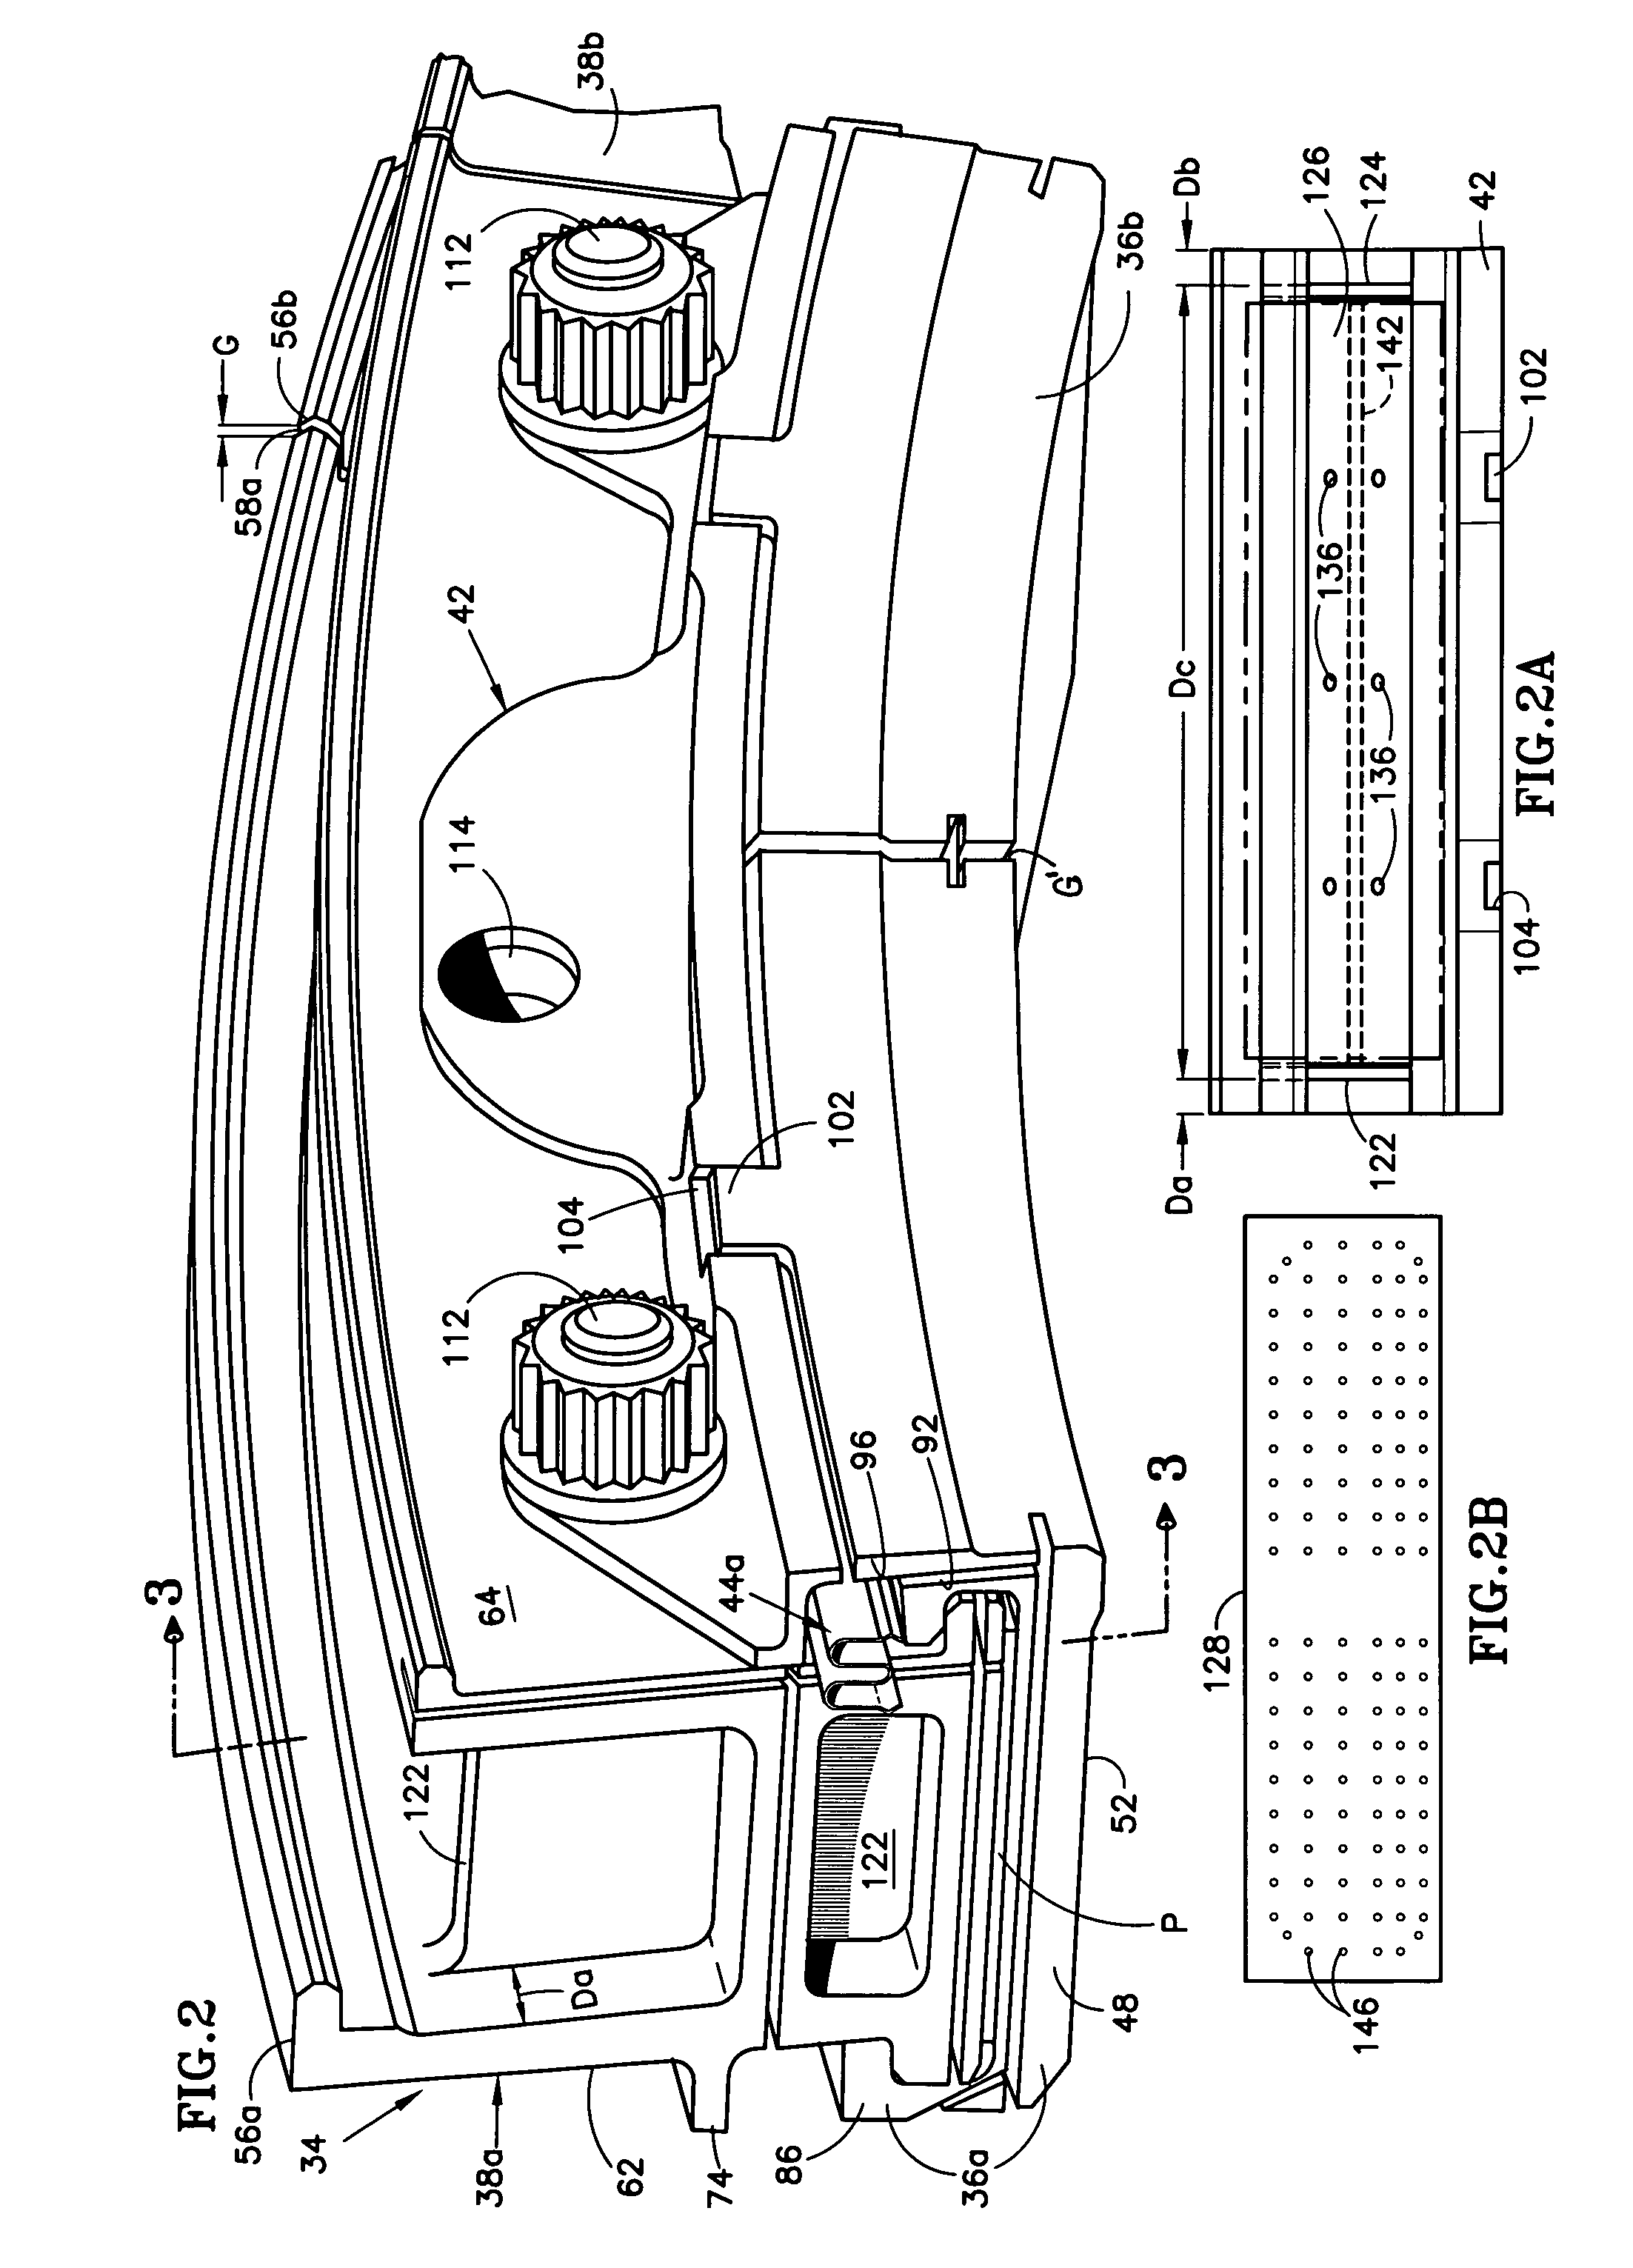 Stator assembly, module and method for forming a rotary machine